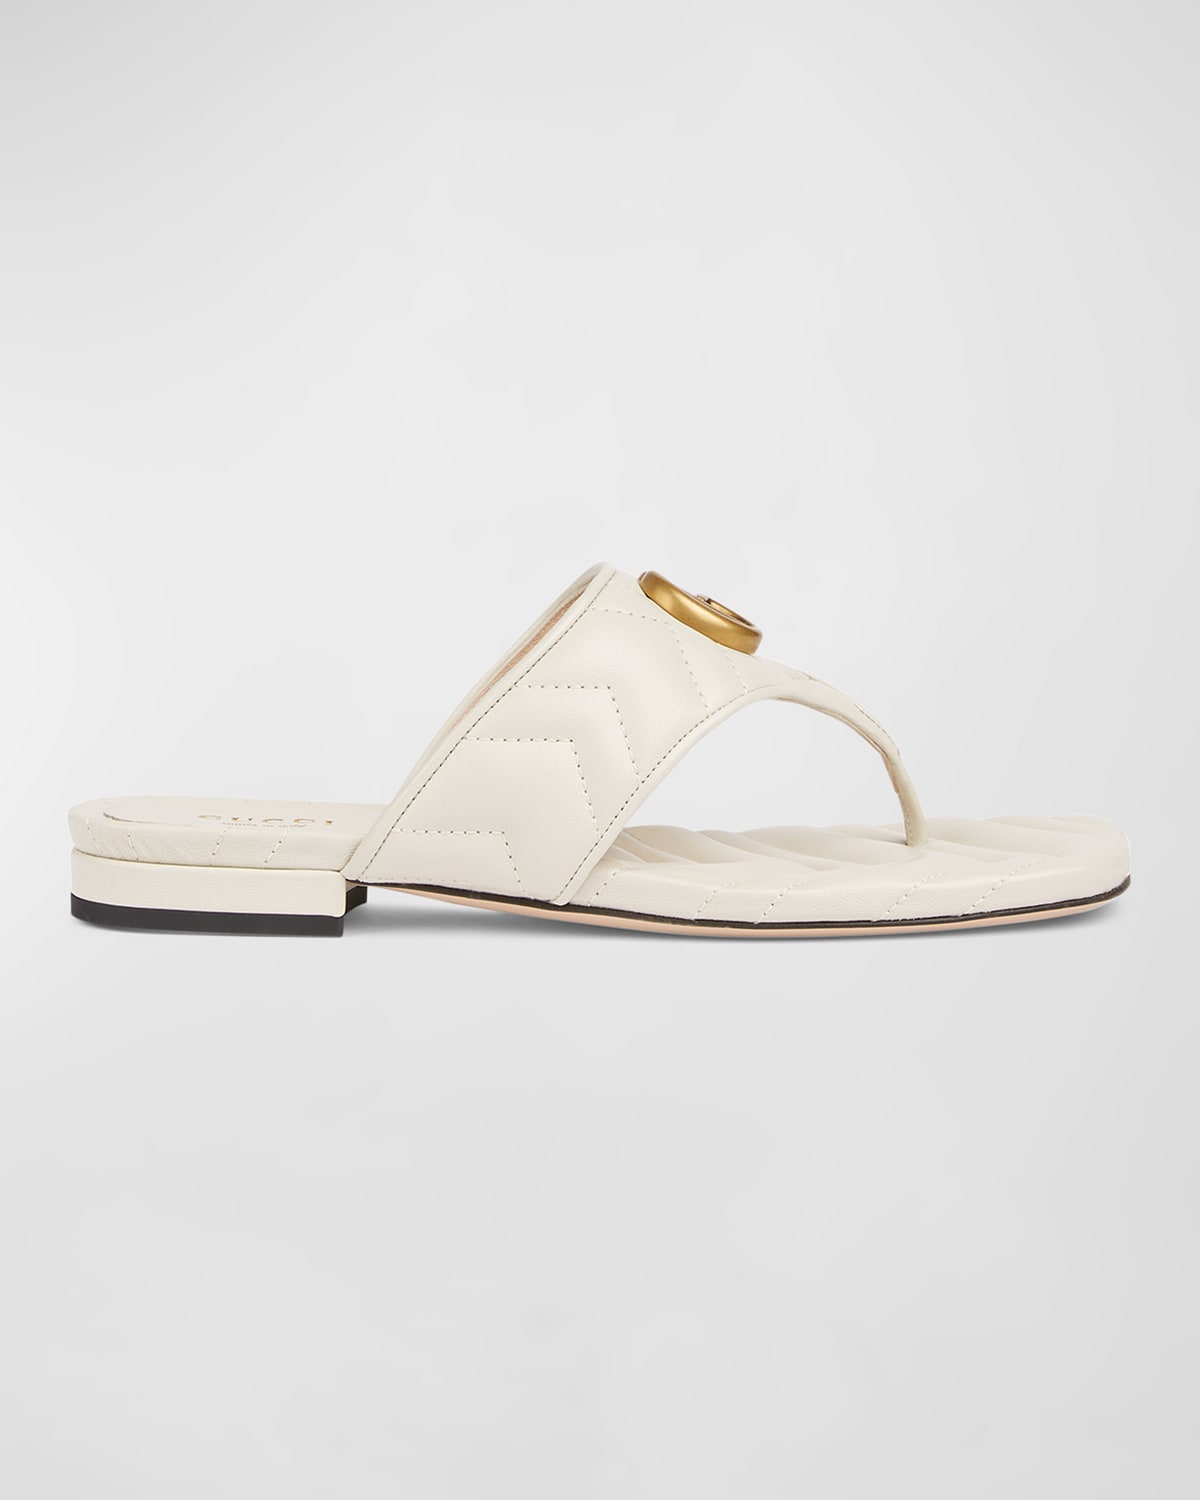 GUCCI DOUBLE G MARMONT THONG SANDALS